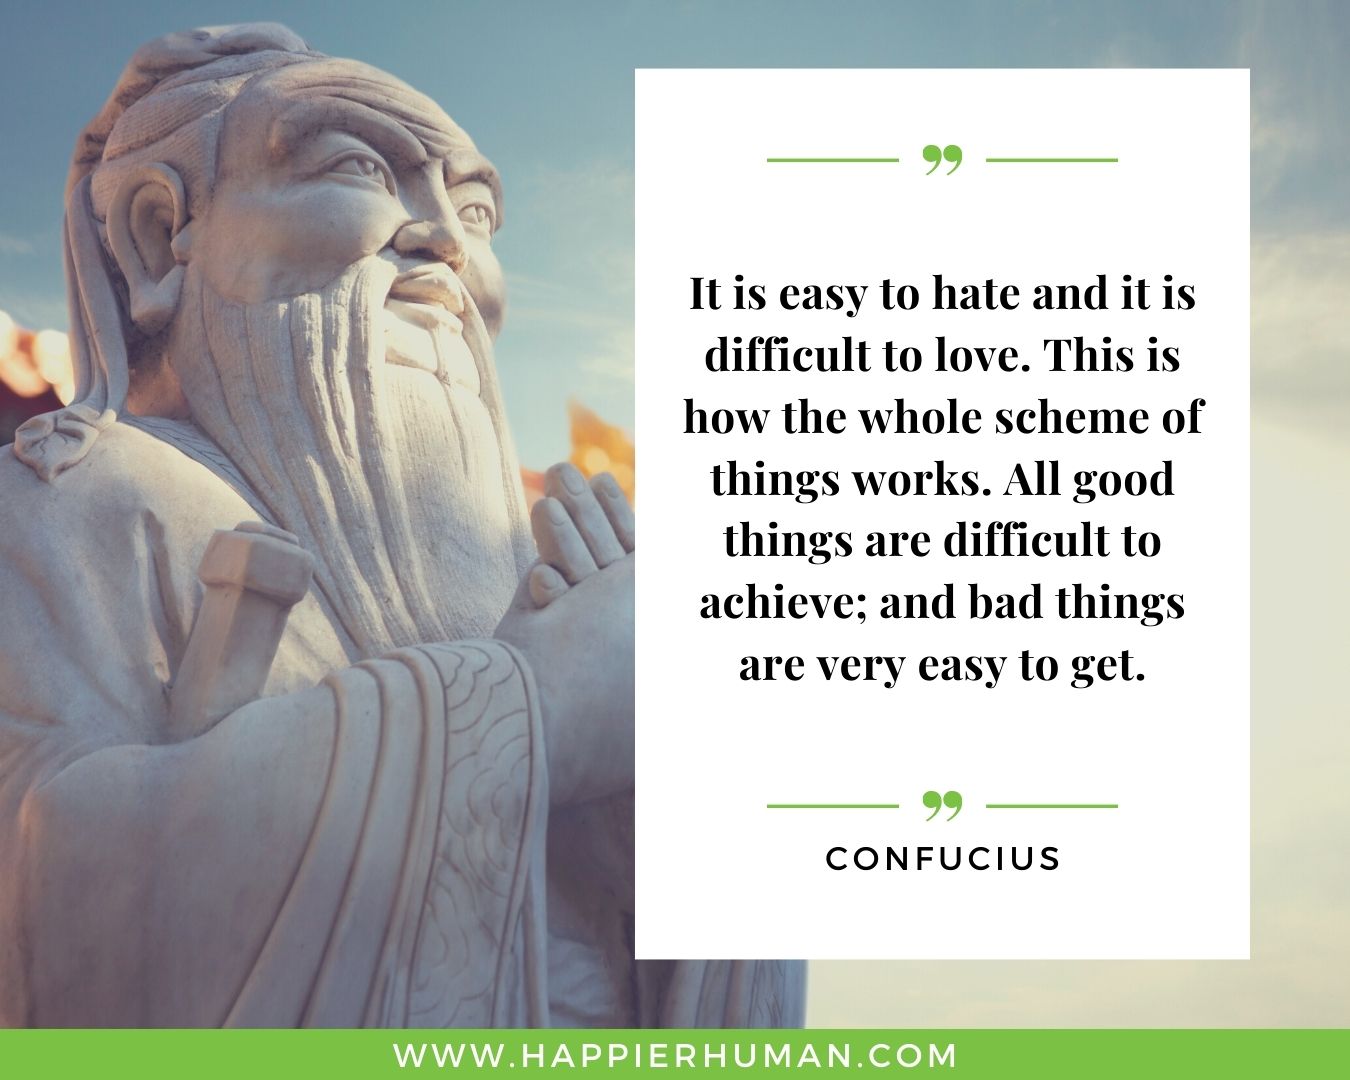 Haters Quotes - “It is easy to hate and it is difficult to love. This is how the whole scheme of things works. All good things are difficult to achieve; and bad things are very easy to get.” - Confucius